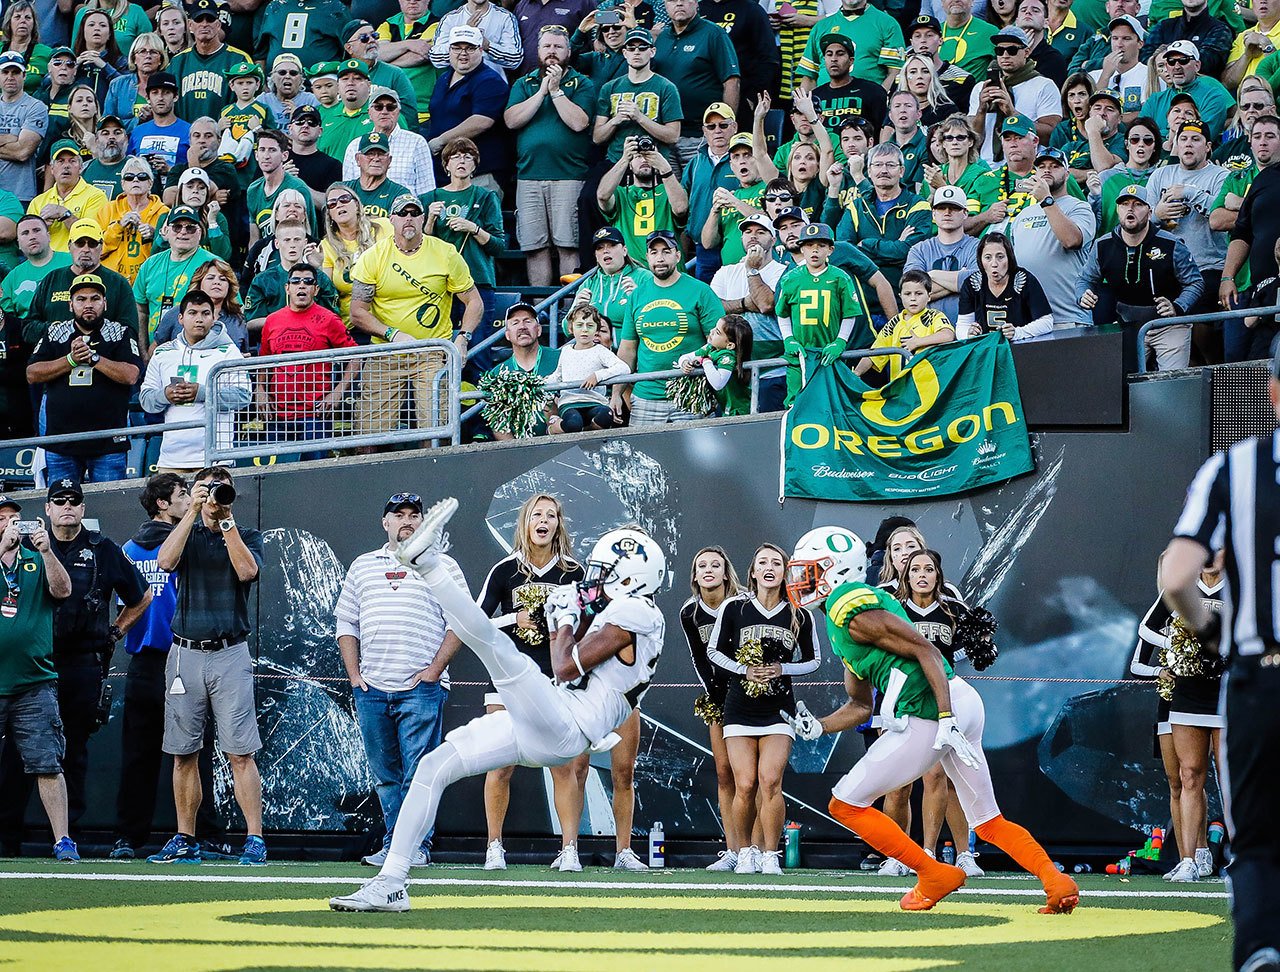 Colorado defensive back Ahkello Witherspoon (23) catches the game-winning interception intended for Oregon wide receiver Darren Carrington II (7) during the last moments of a game Saturday in Eugene, Ore. (AP Photo/Thomas Boyd)